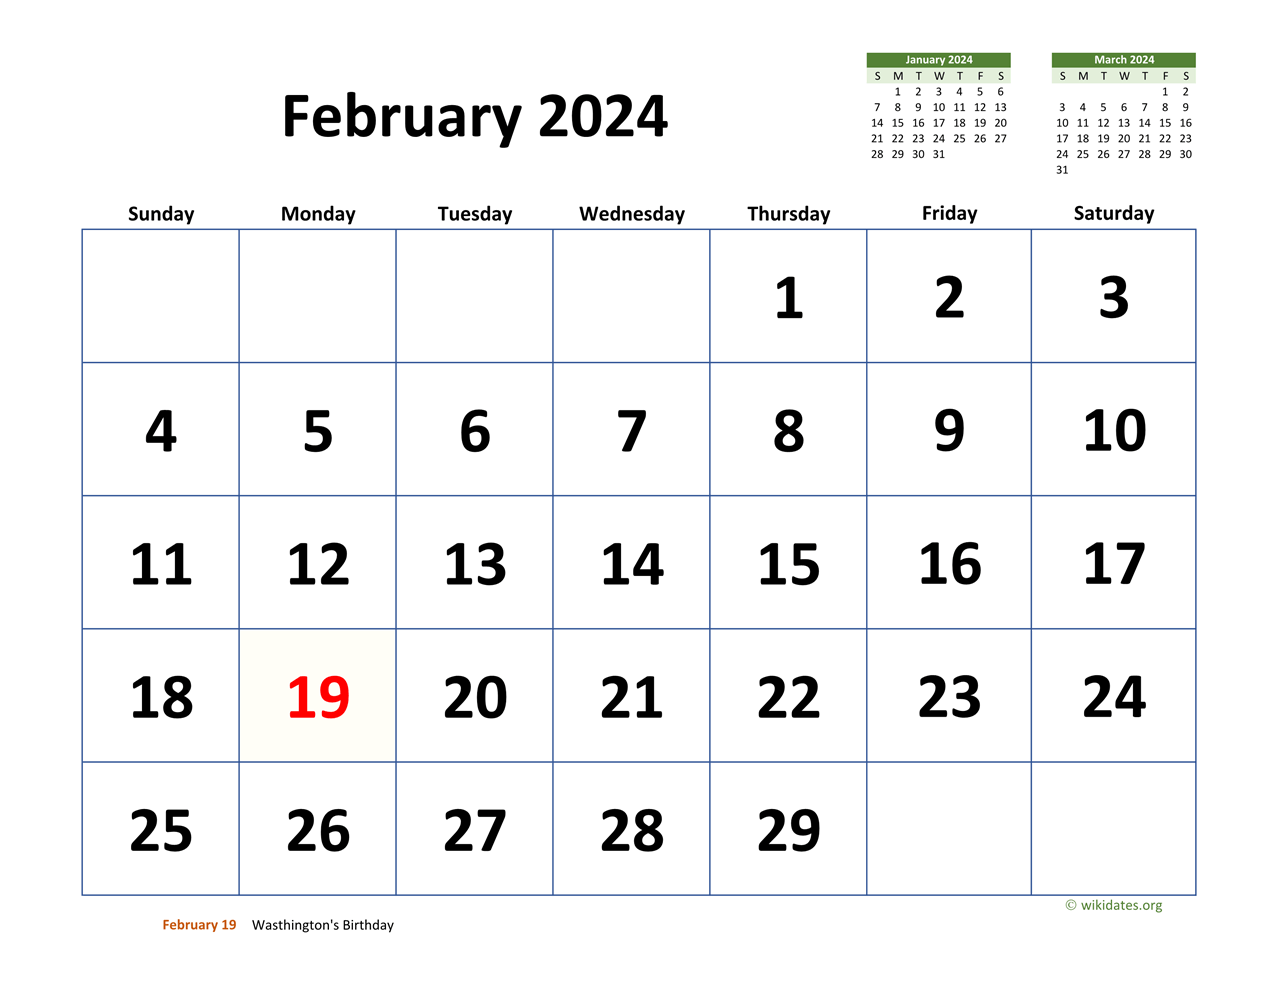 February 2024 Calendar with Extralarge Dates